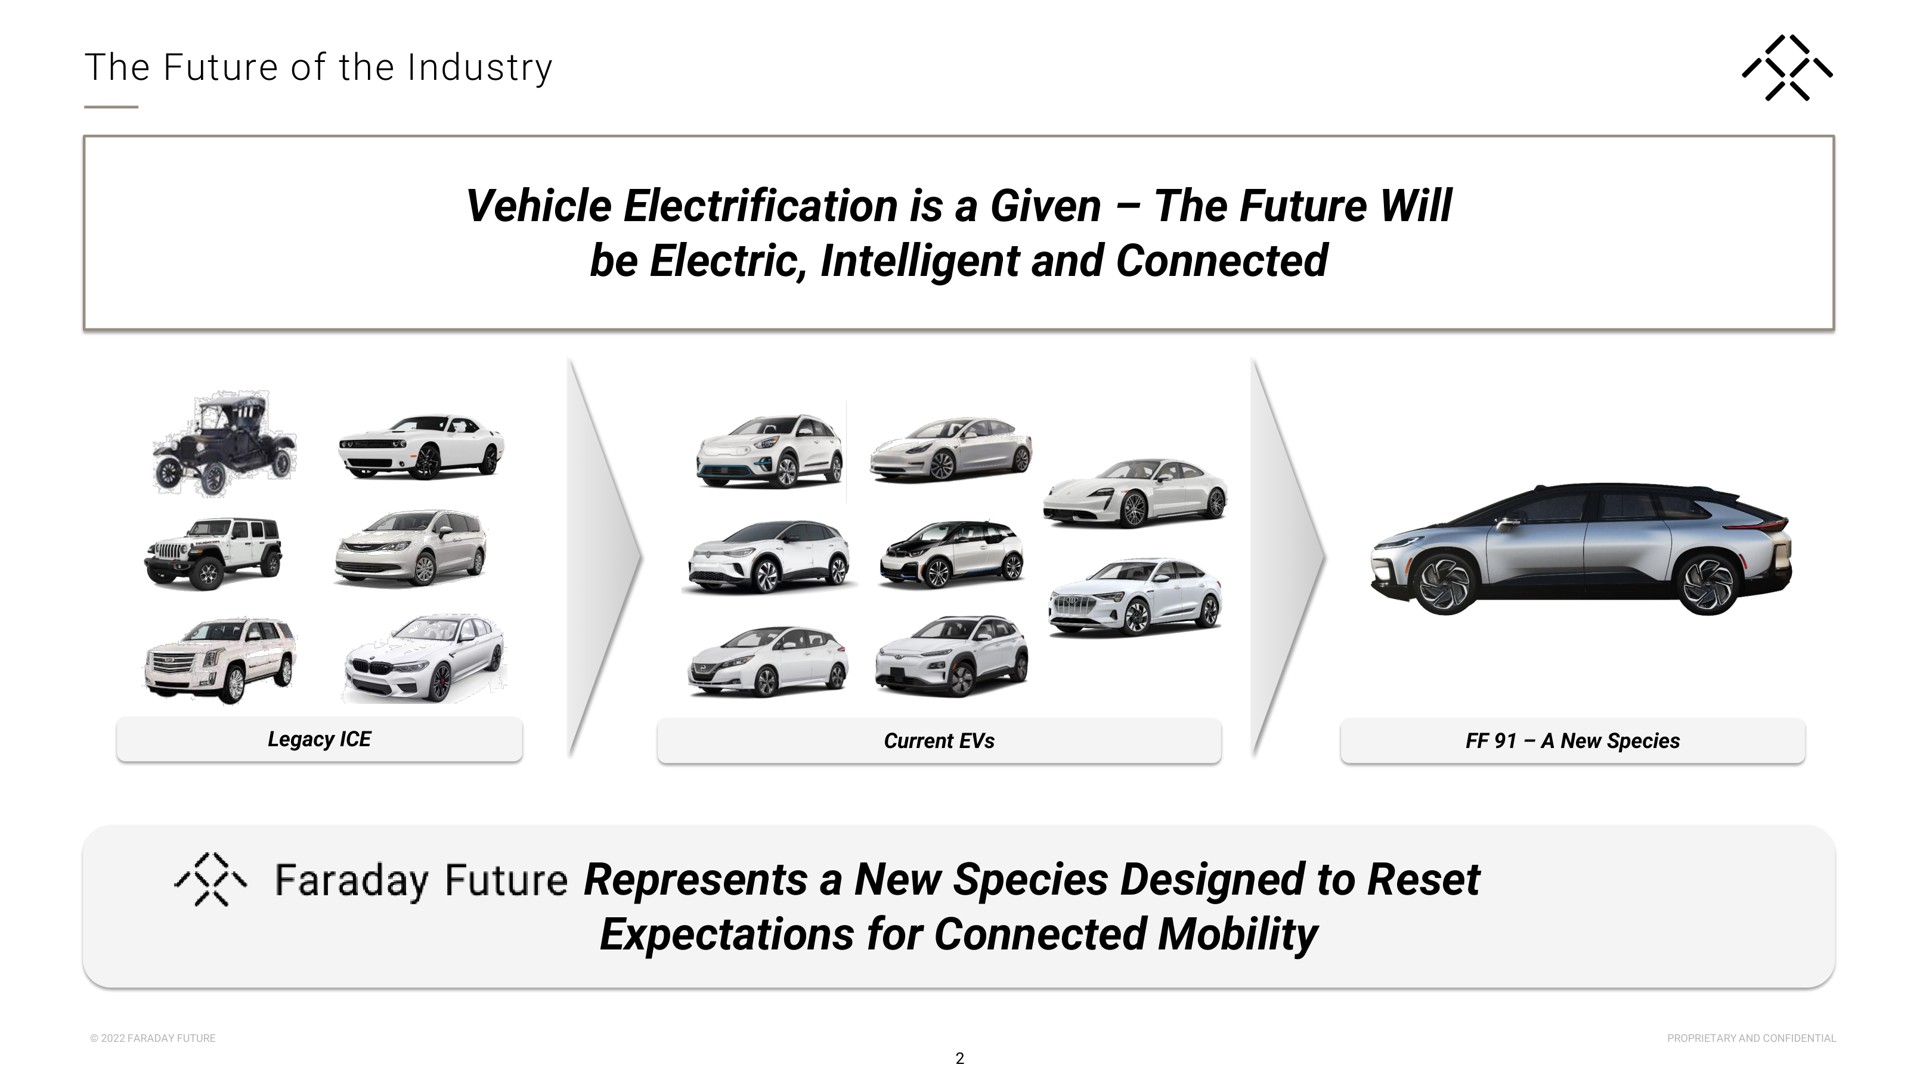 the future of the industry vehicle electrification is a given the future will be electric intelligent and connected represents a new species designed to reset expectations for connected mobility faraday | Faraday Future